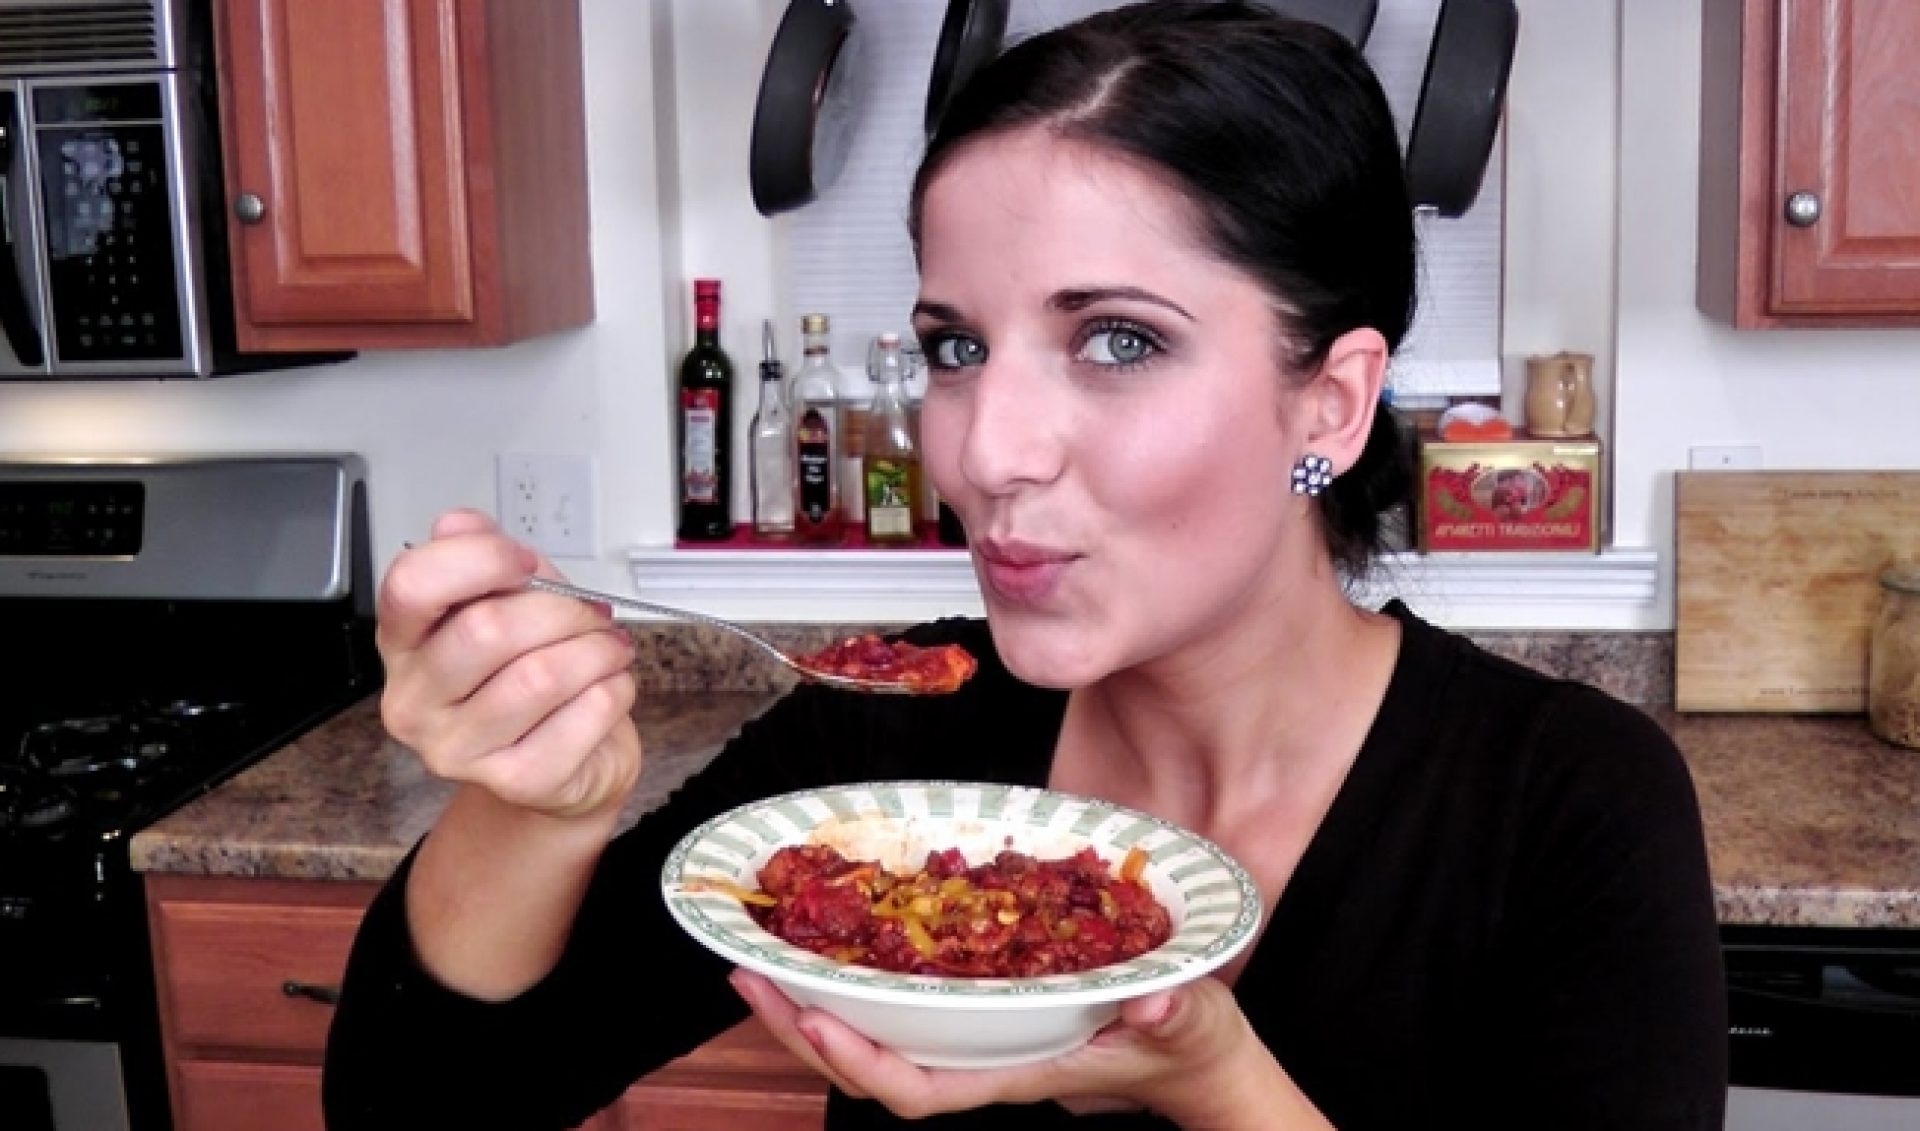 YouTube Millionaires: ‘Laura In The Kitchen’ Will Make You Very Hungry